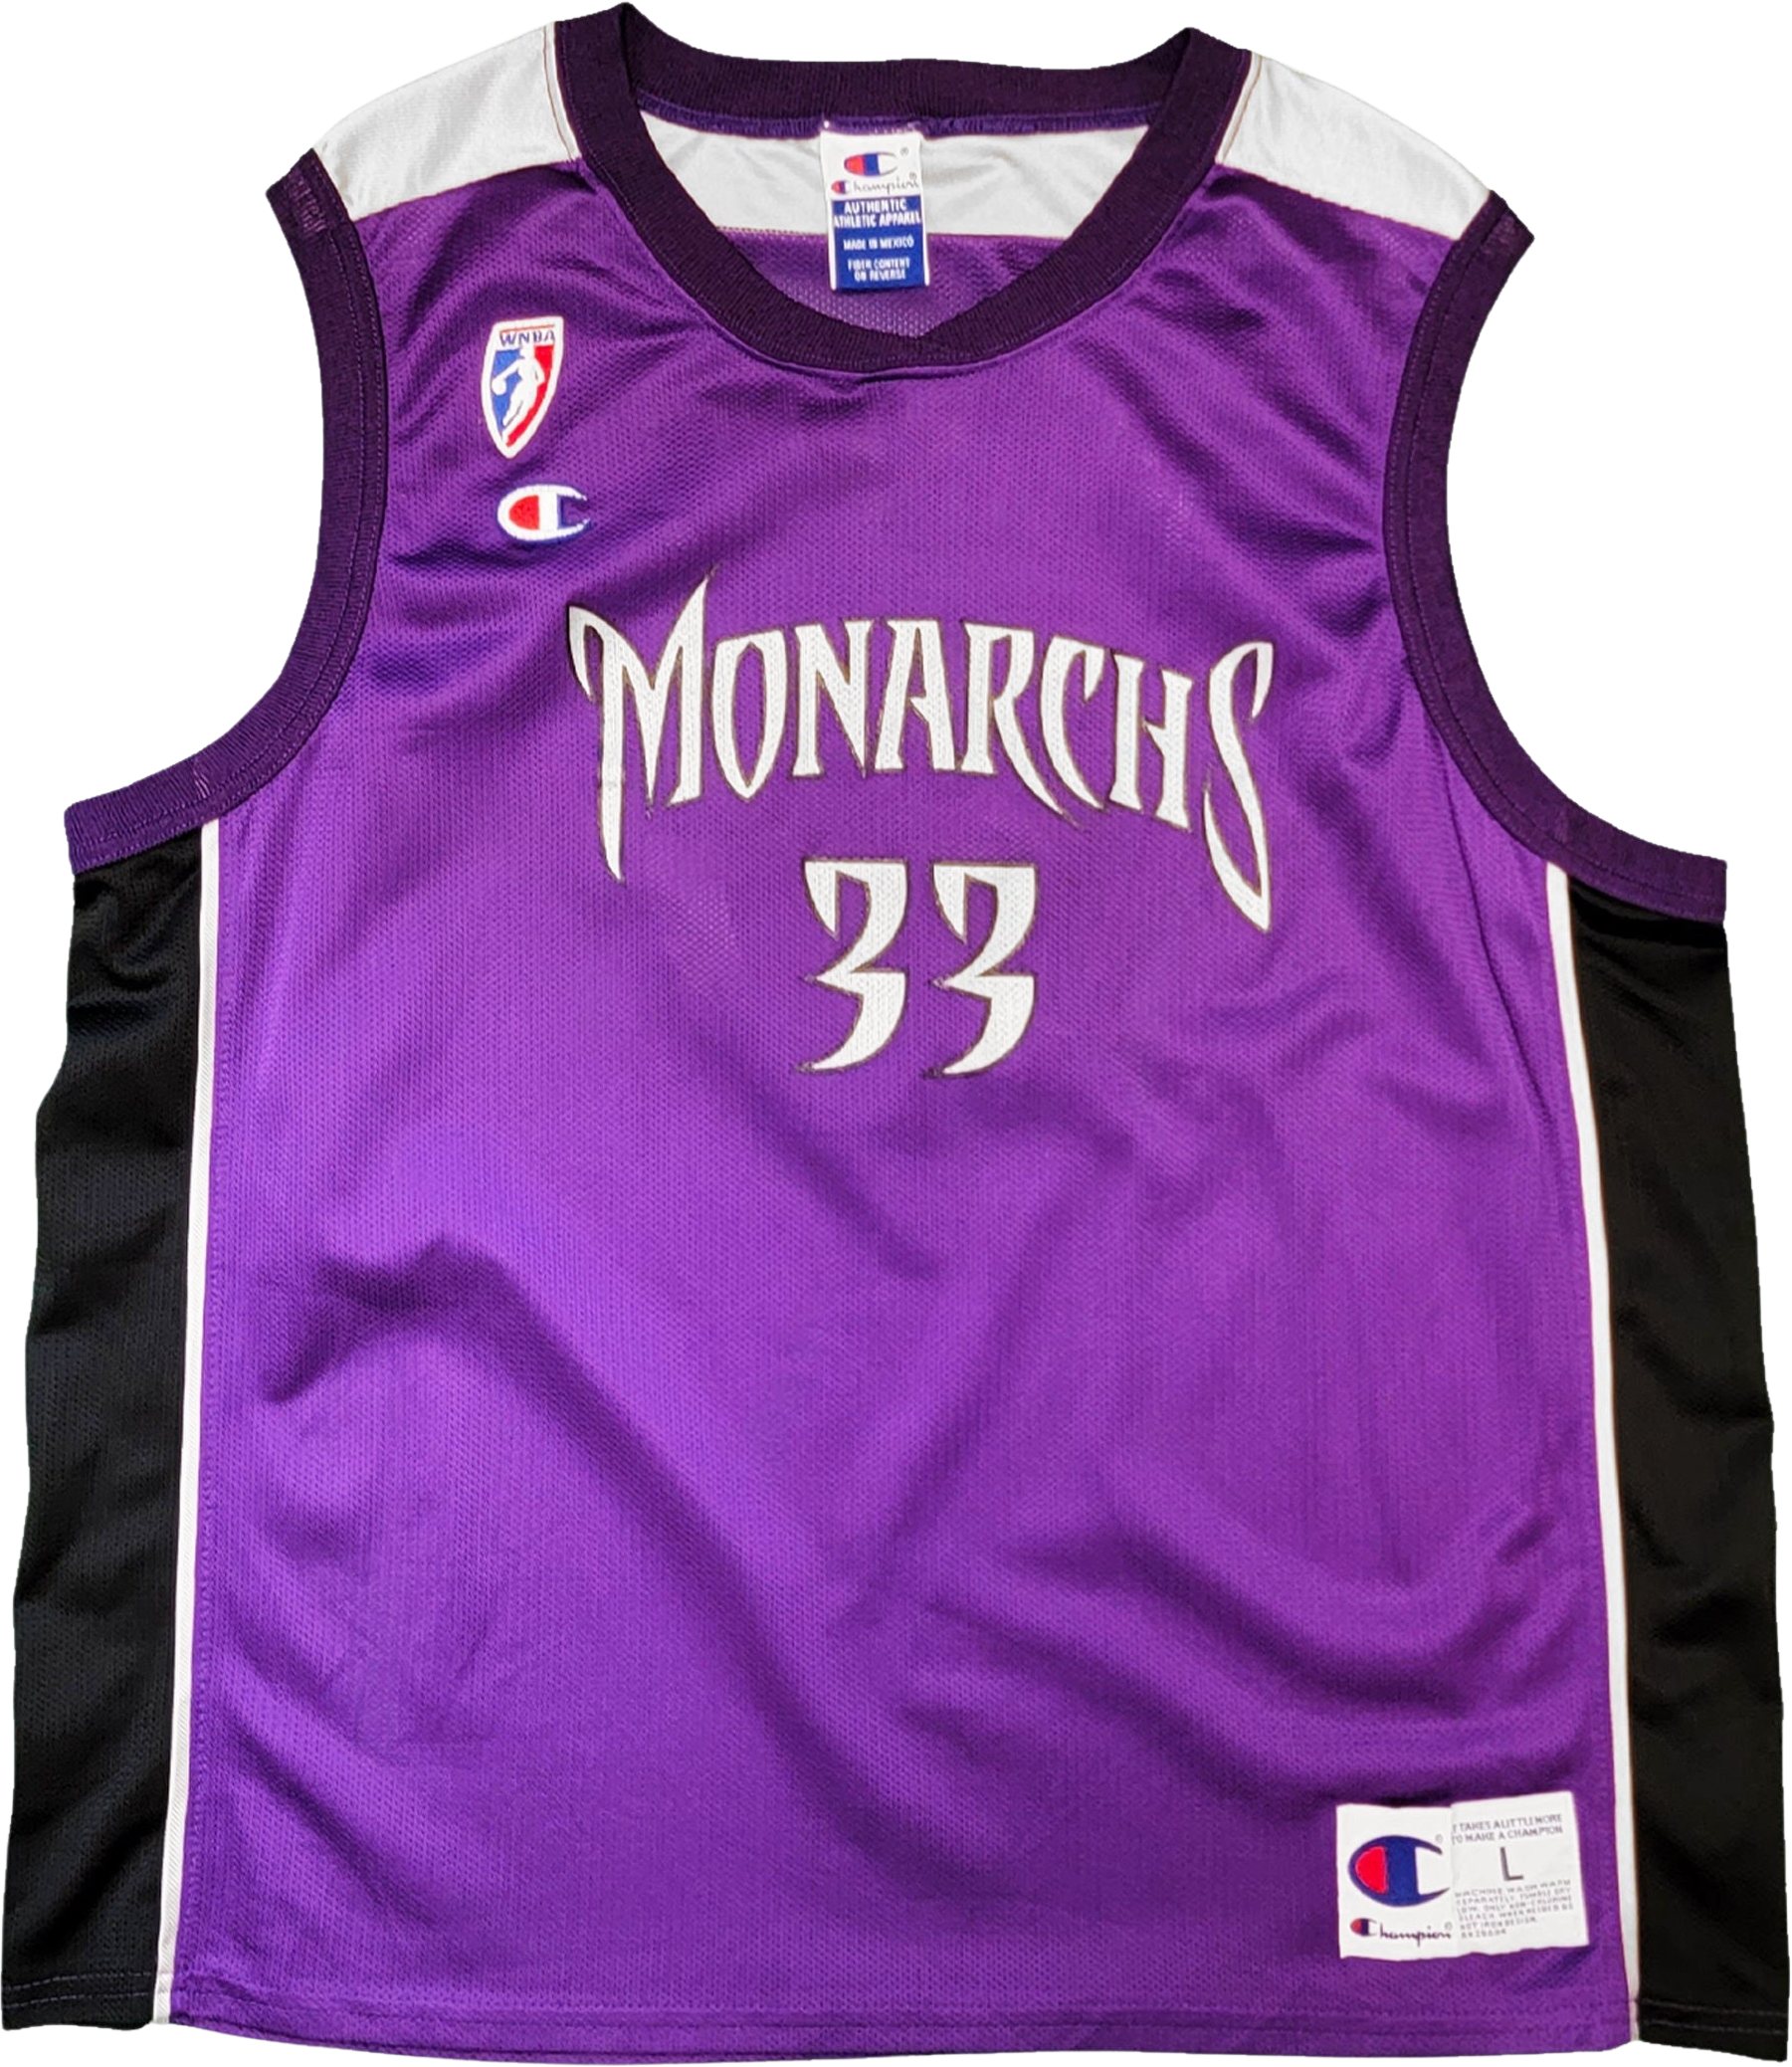 27 Yellow Number Twenty-seven Purple Basketball Jersey Poster for Sale by  elhefe